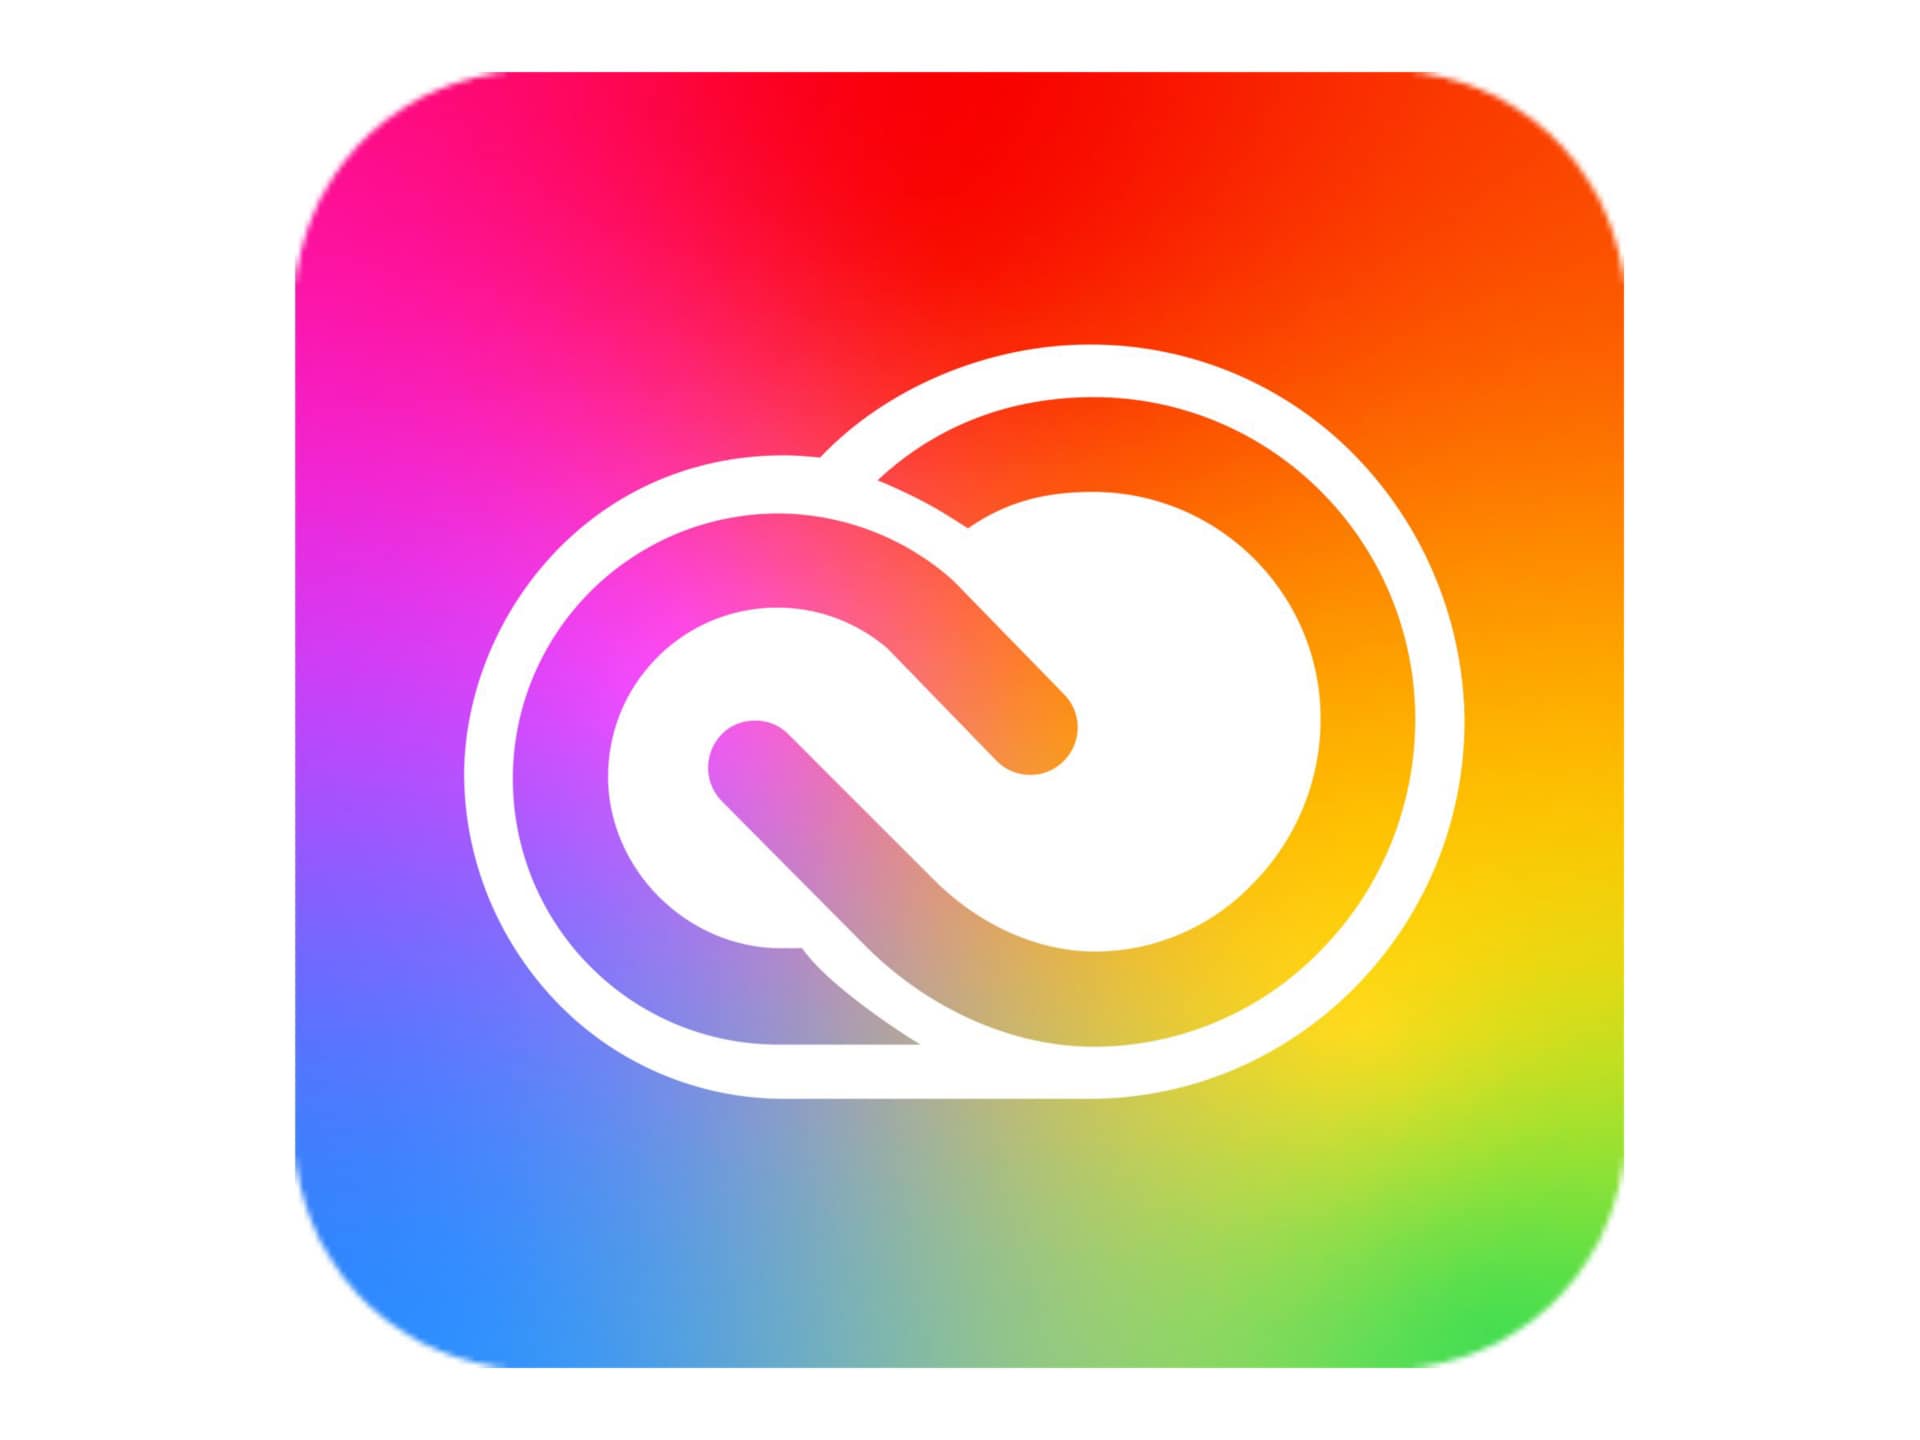 Adobe Creative Cloud for Enterprise - All Apps - Subscription New (6 months